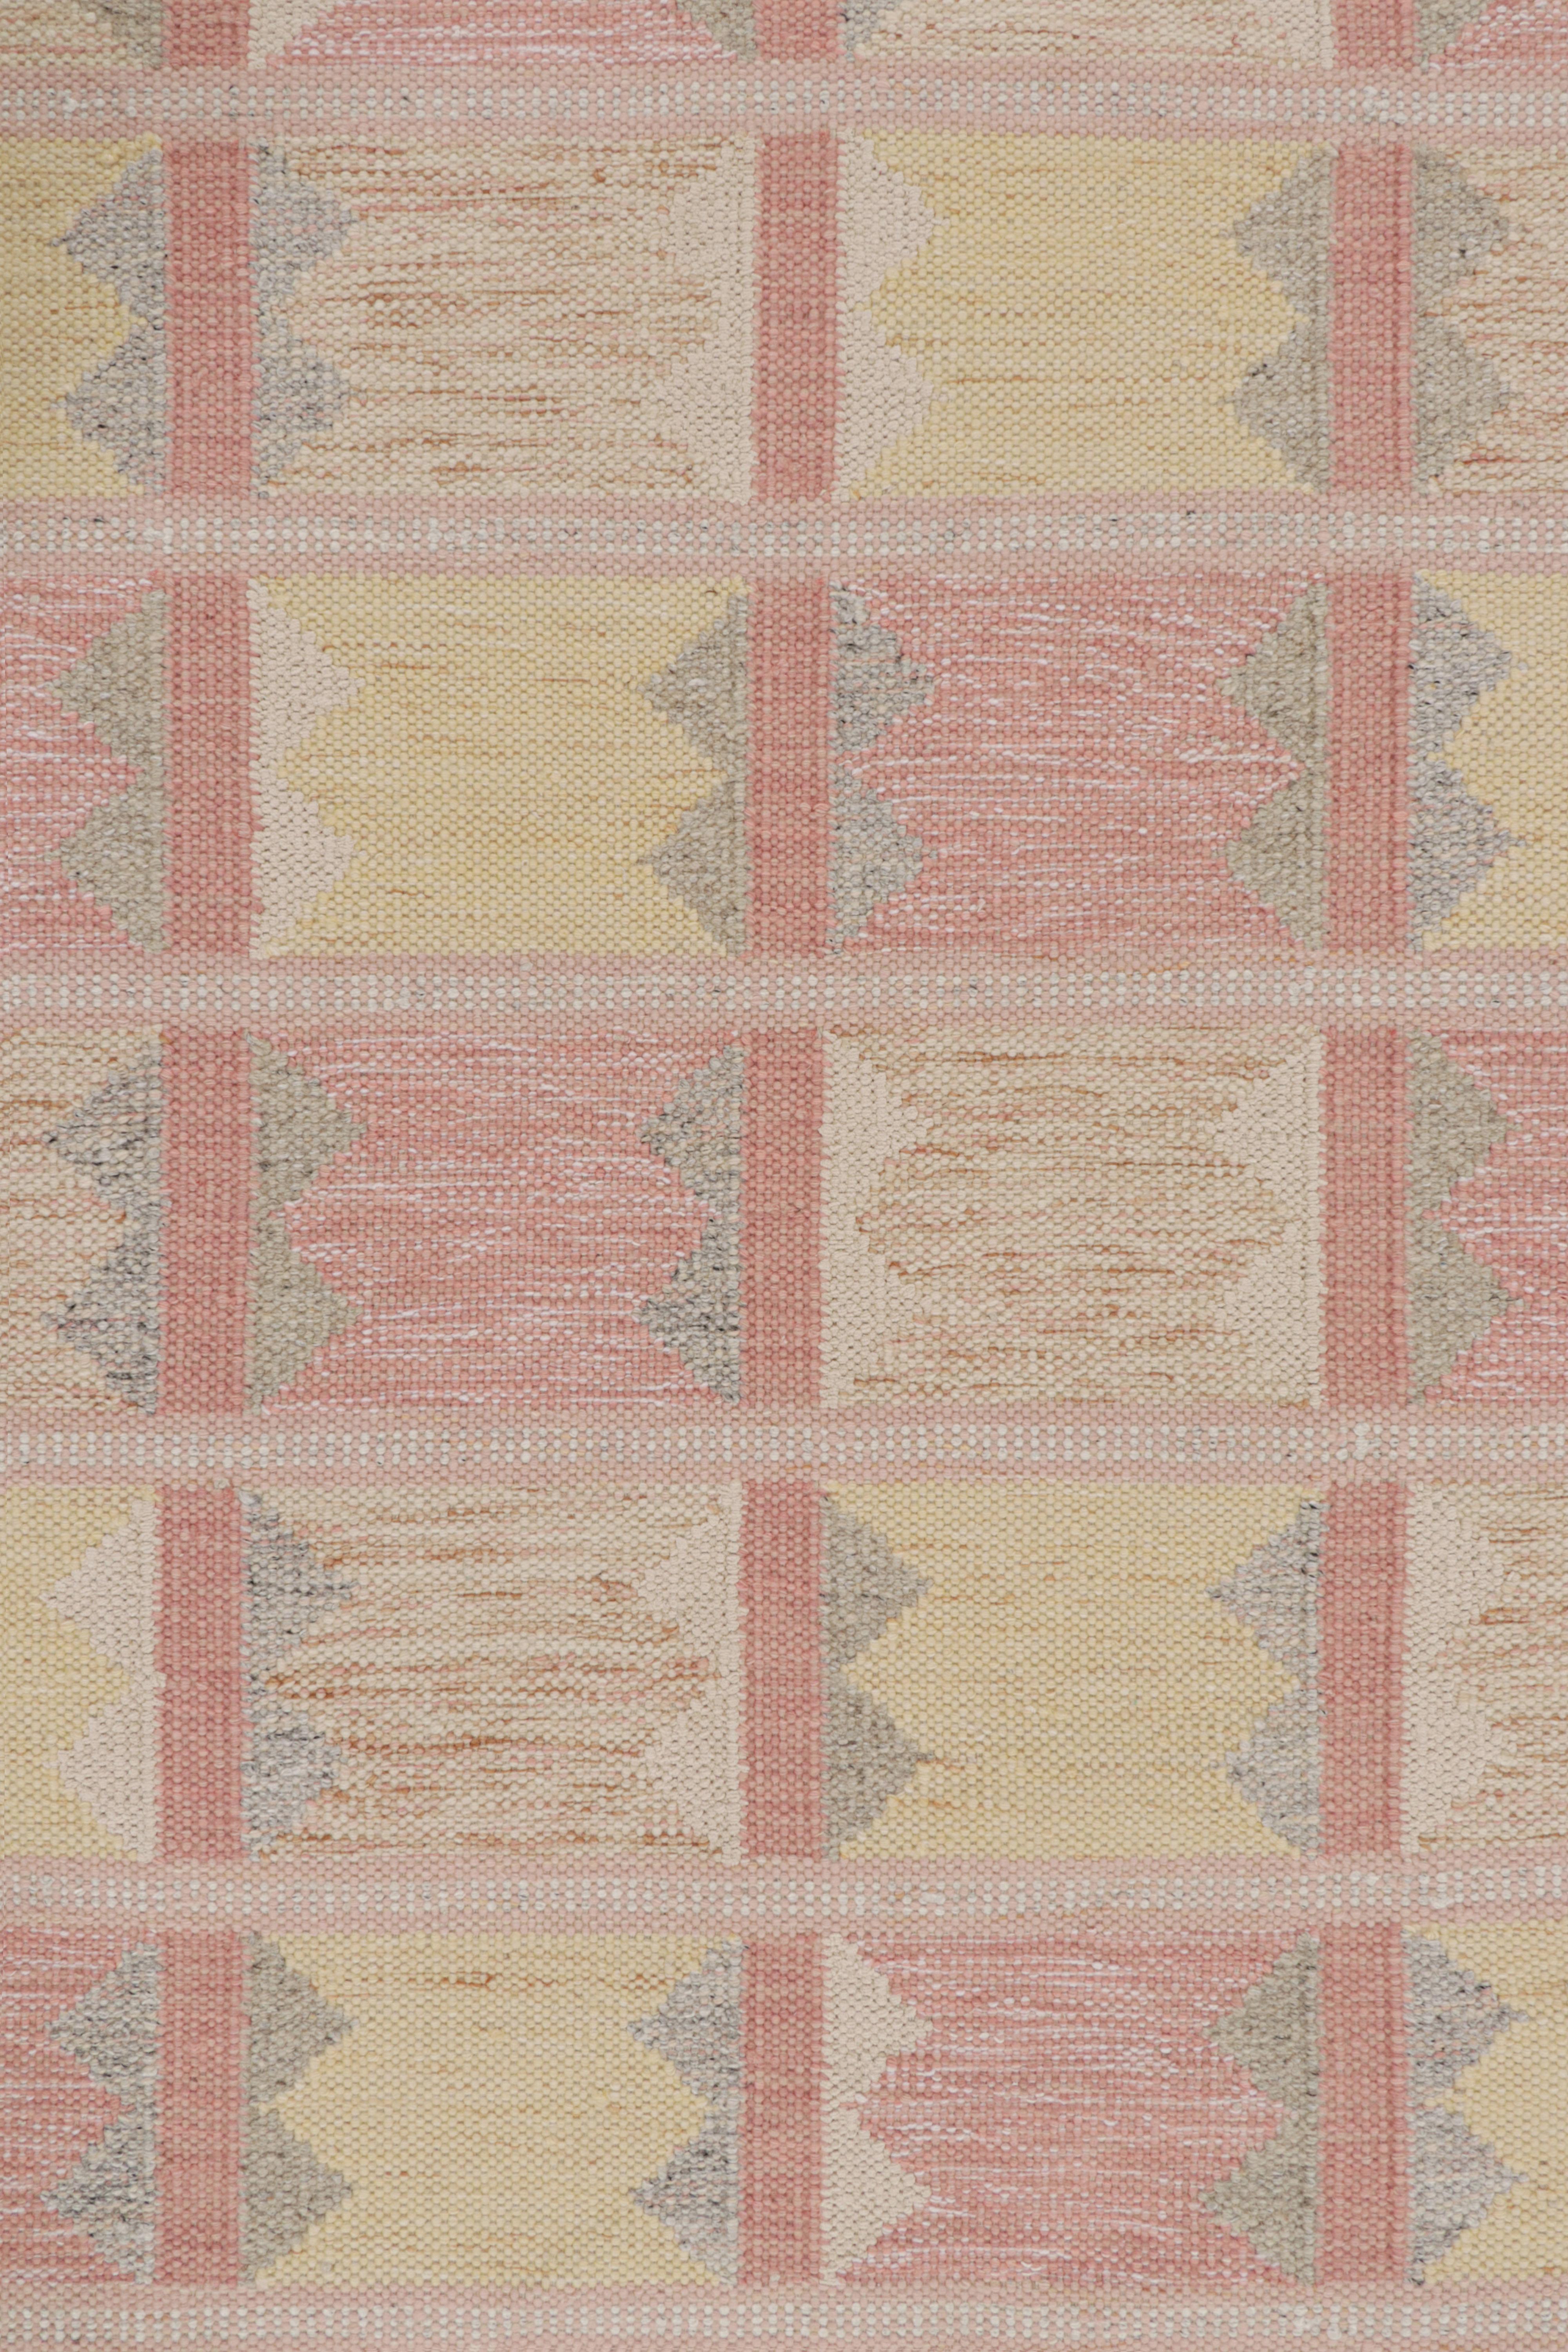 Contemporary Rug & Kilim’s Scandinavian Style Kilim in Cream and Pink Geometric Patterns For Sale